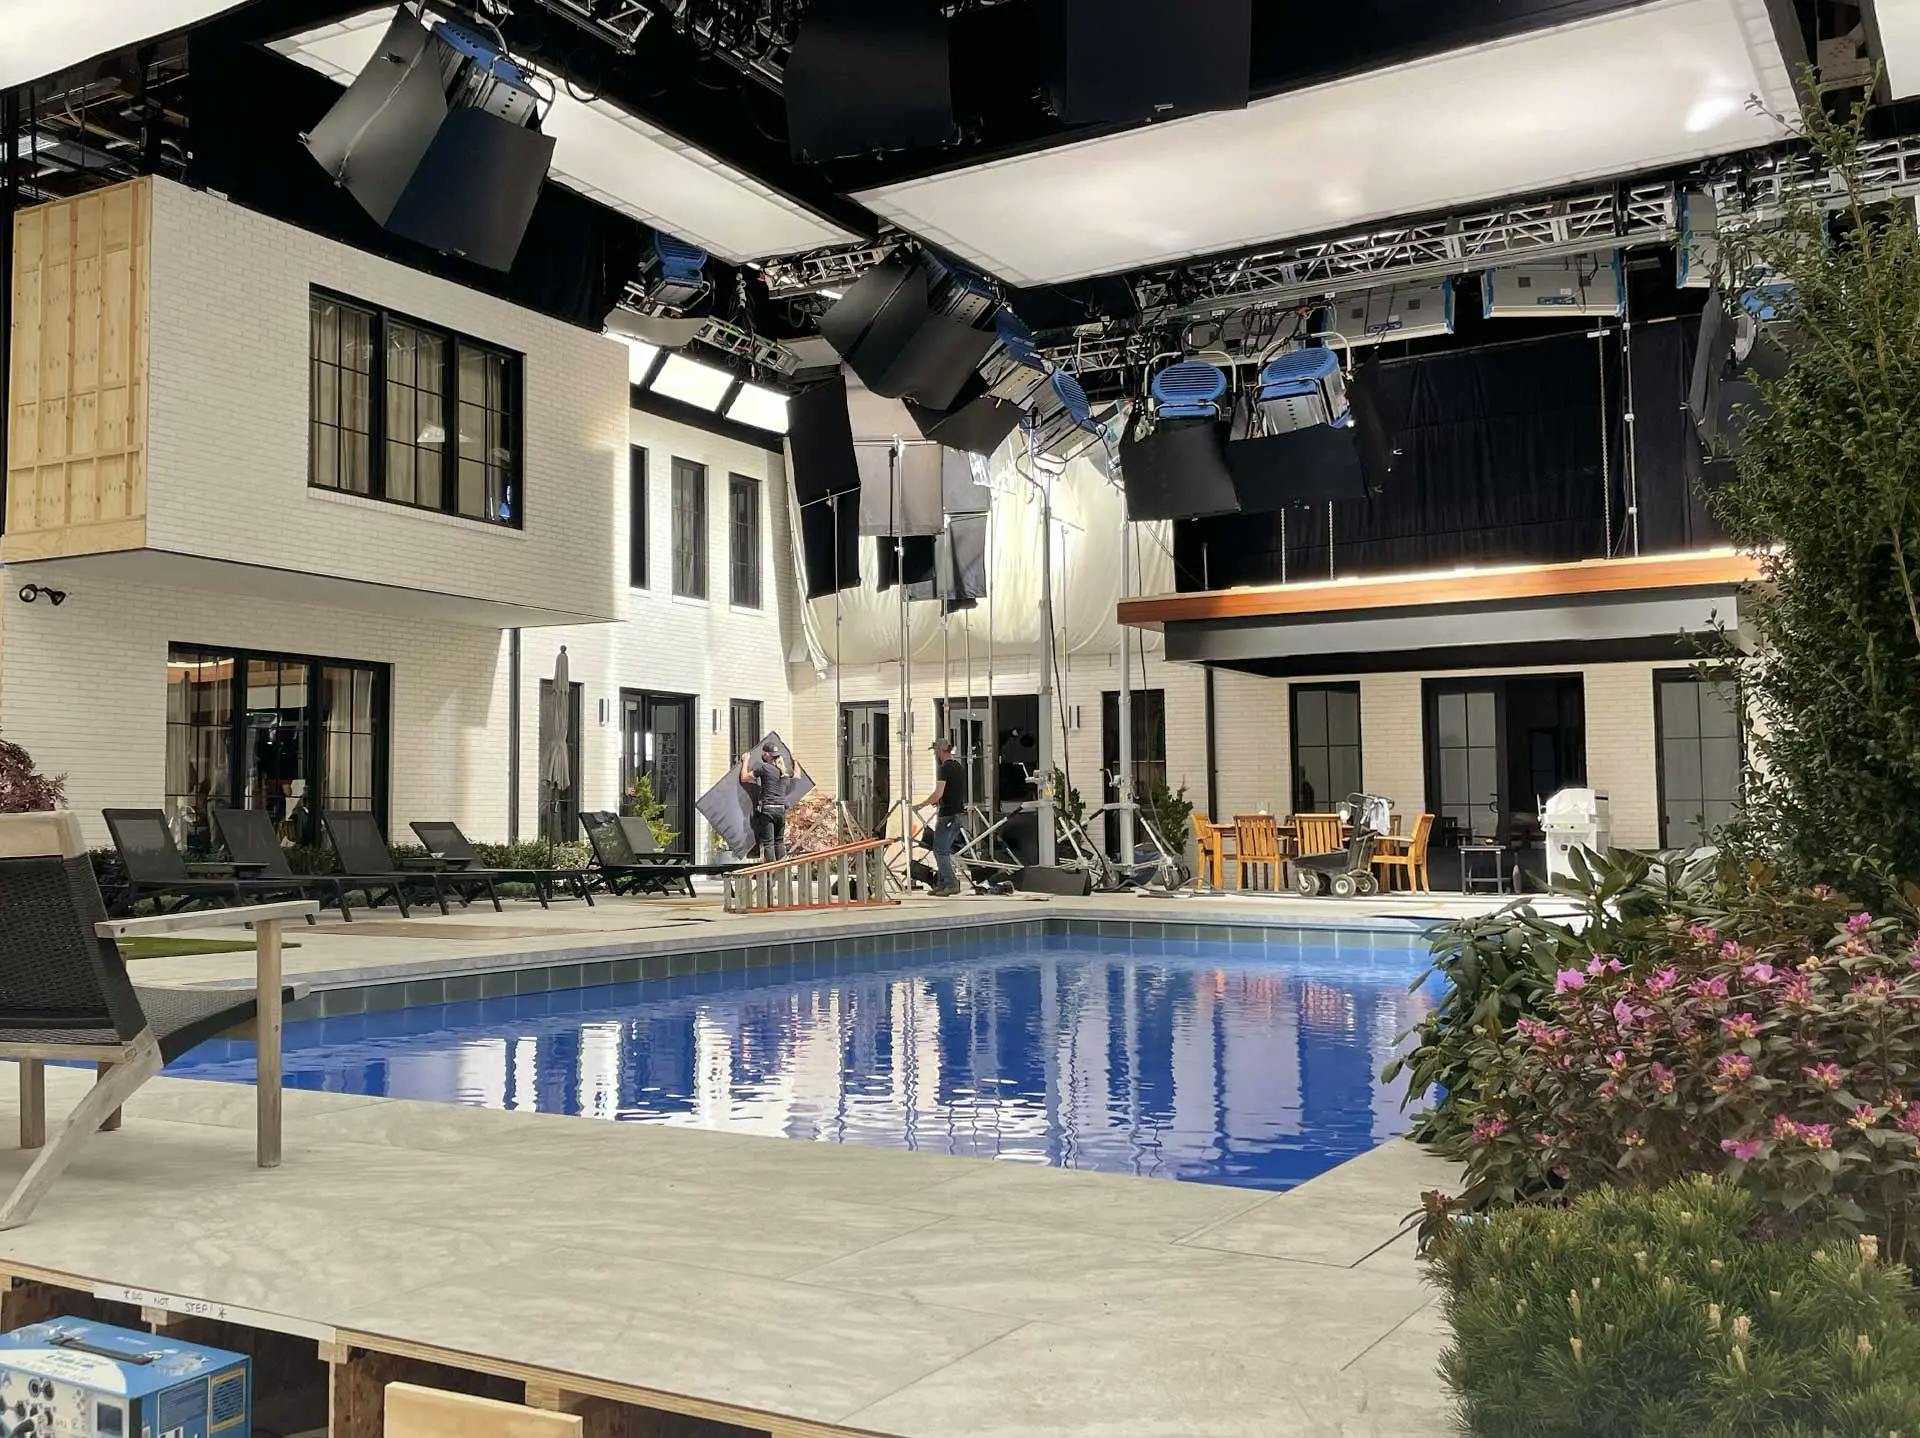 A constructed film set of a white modern house with a pool for the Netflix film, Leave the World Behind.